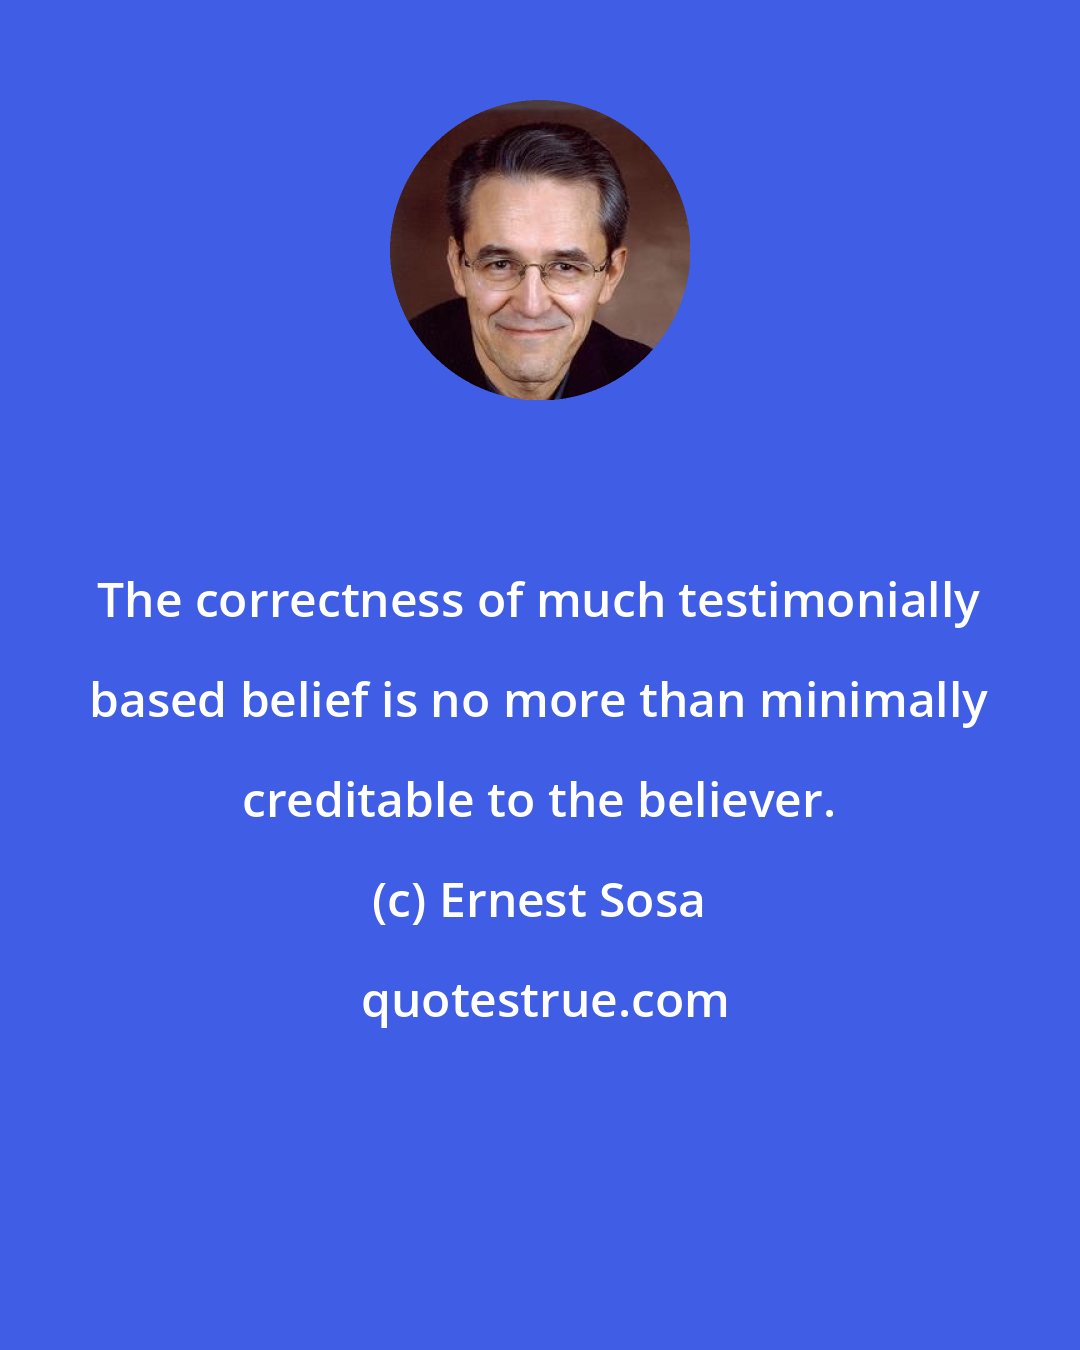 Ernest Sosa: The correctness of much testimonially based belief is no more than minimally creditable to the believer.